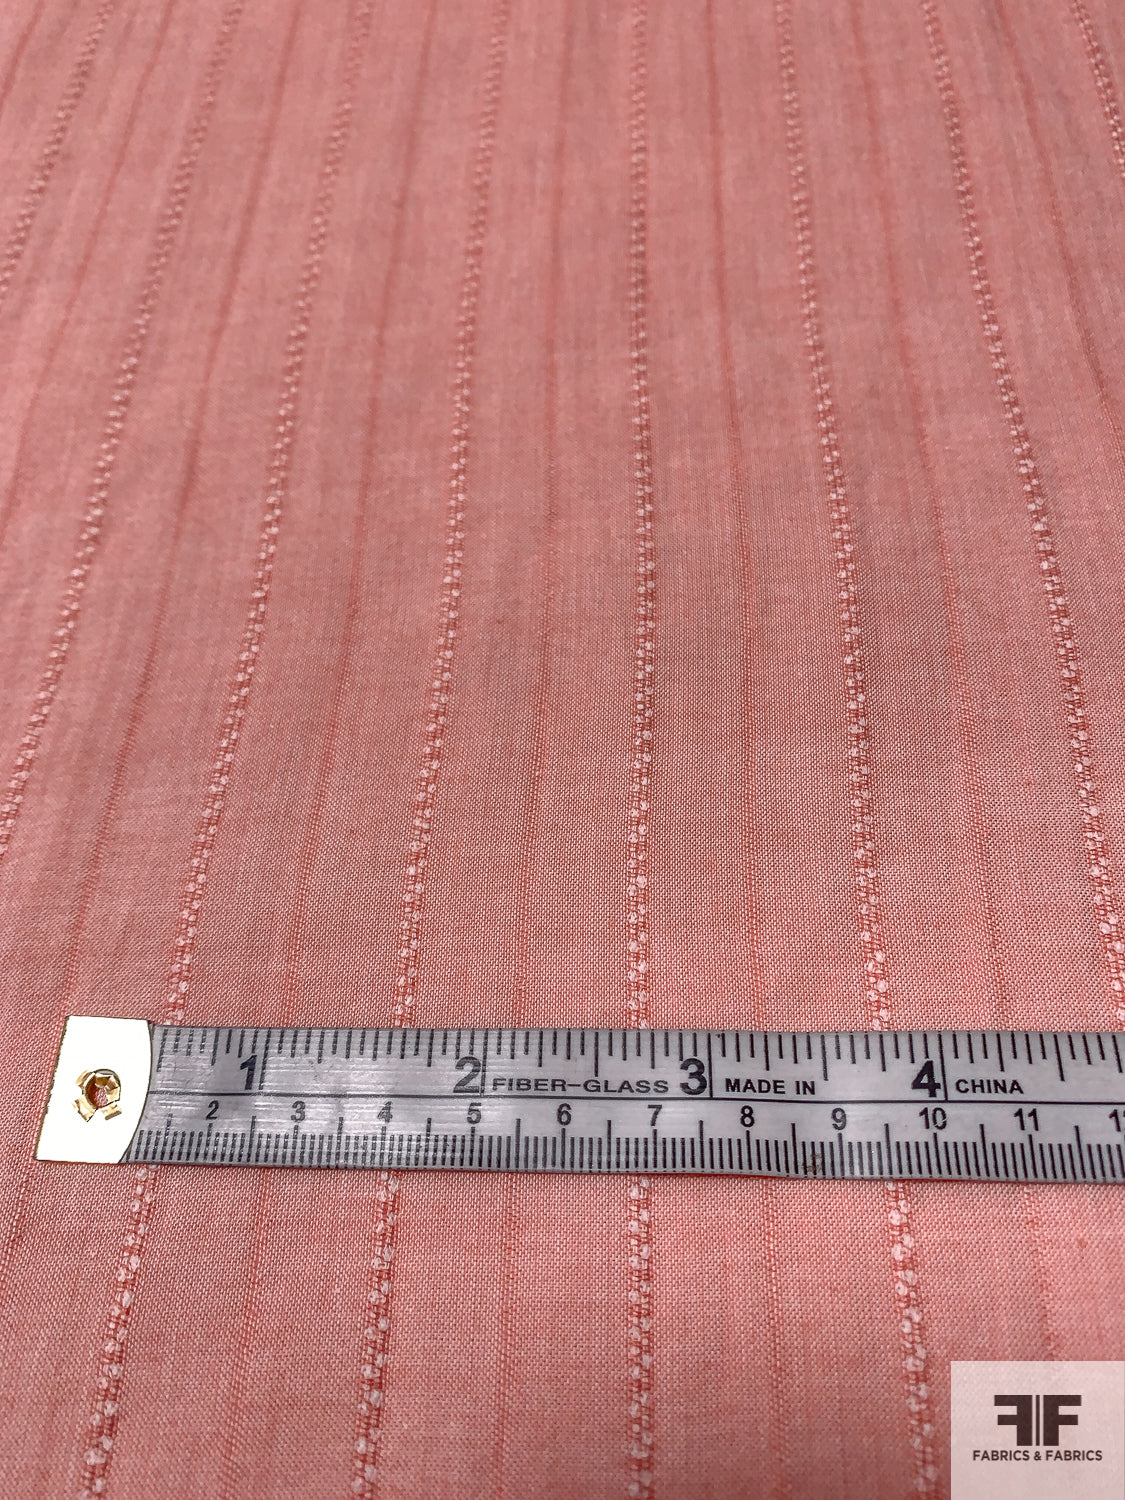 Woven Vertical Striped Cotton Voile - Muted Coral / White